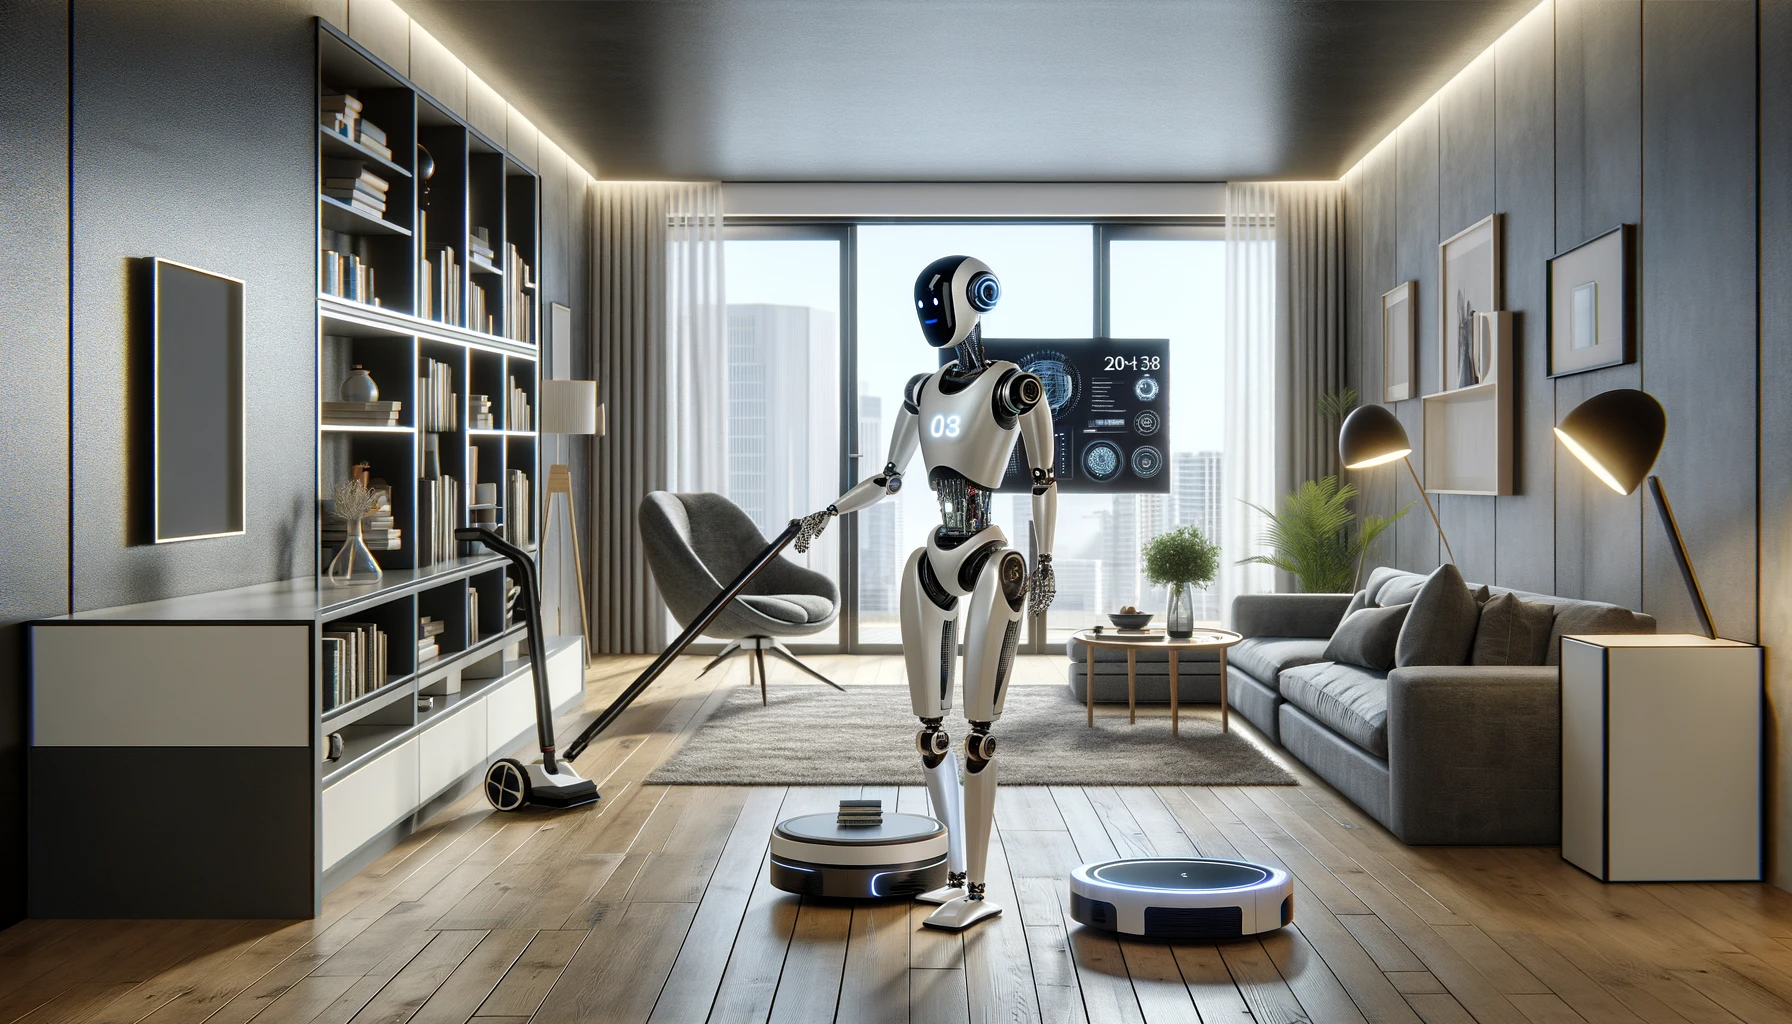 From Sci-Fi to Reality: Robot Butlers for Household Assistance